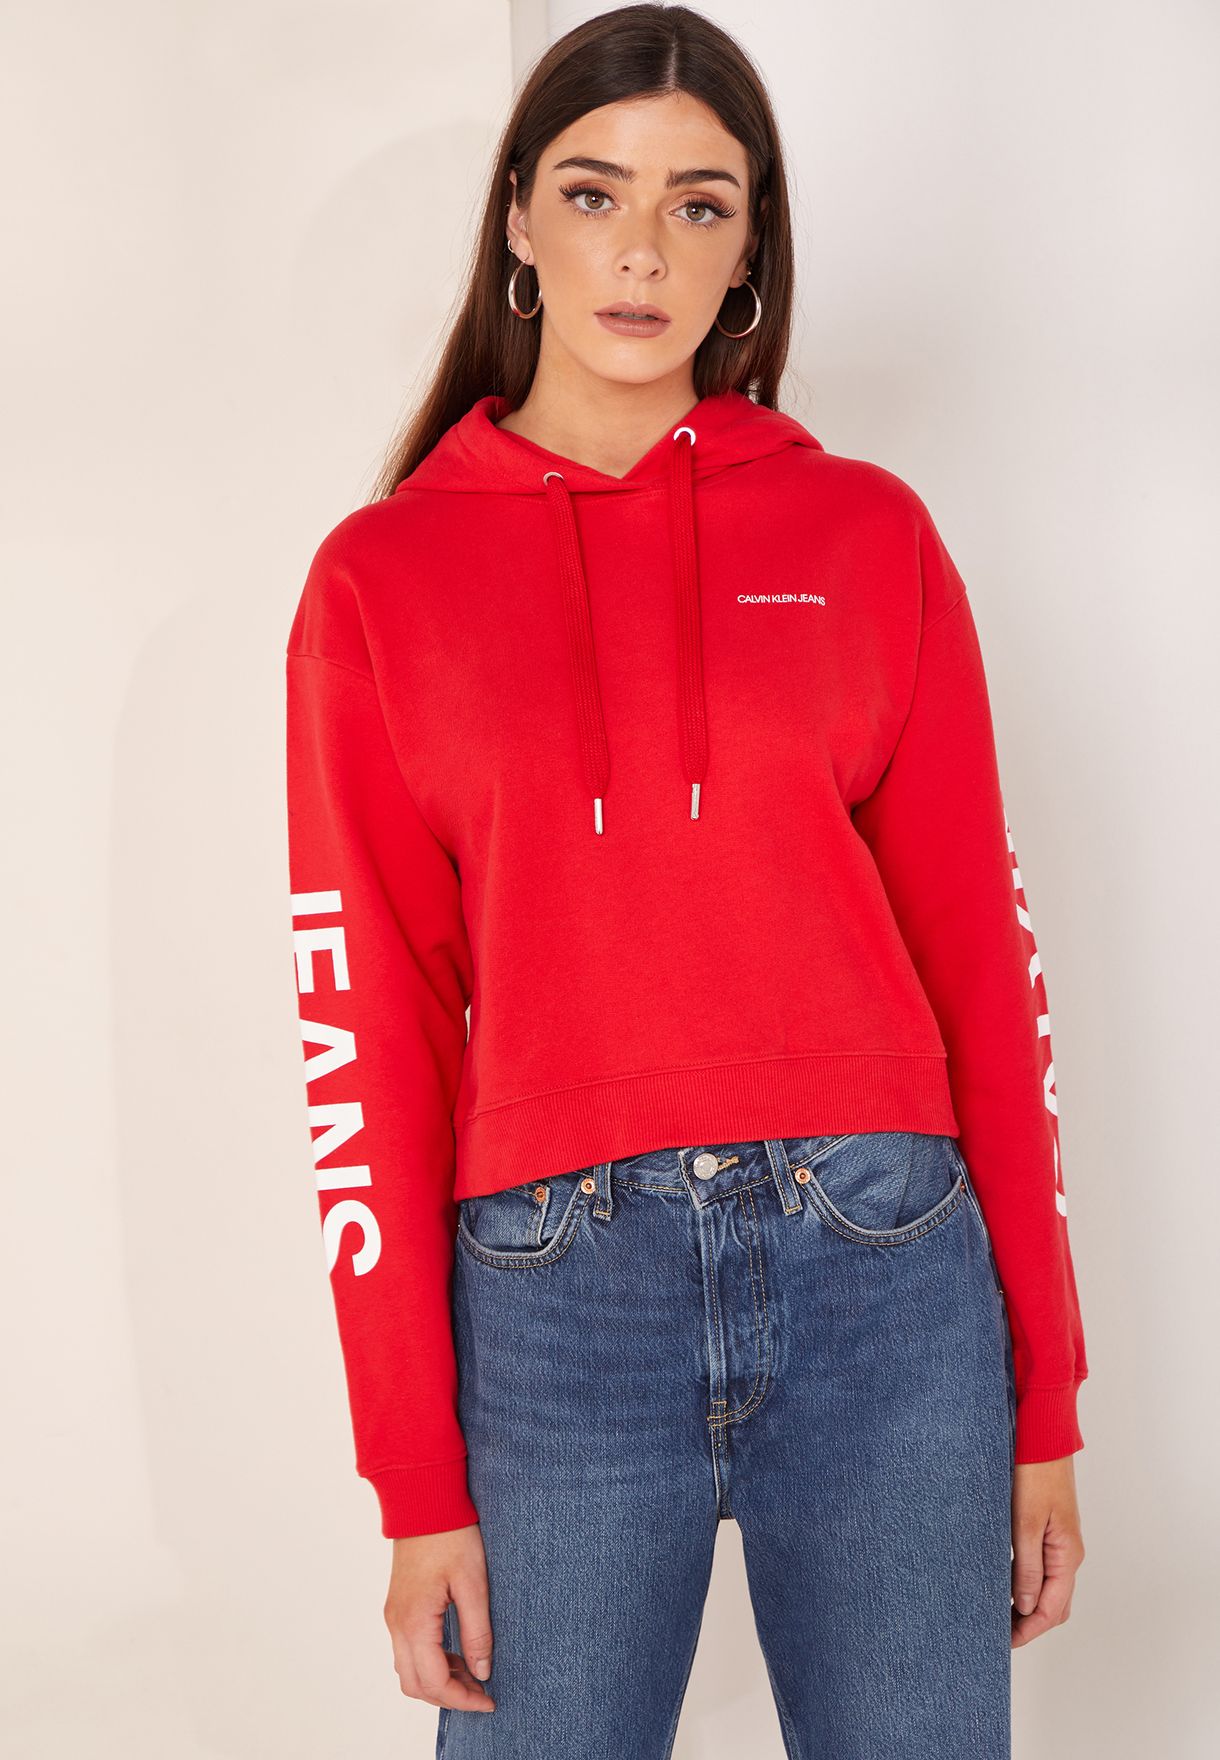 hoodie and jeans women